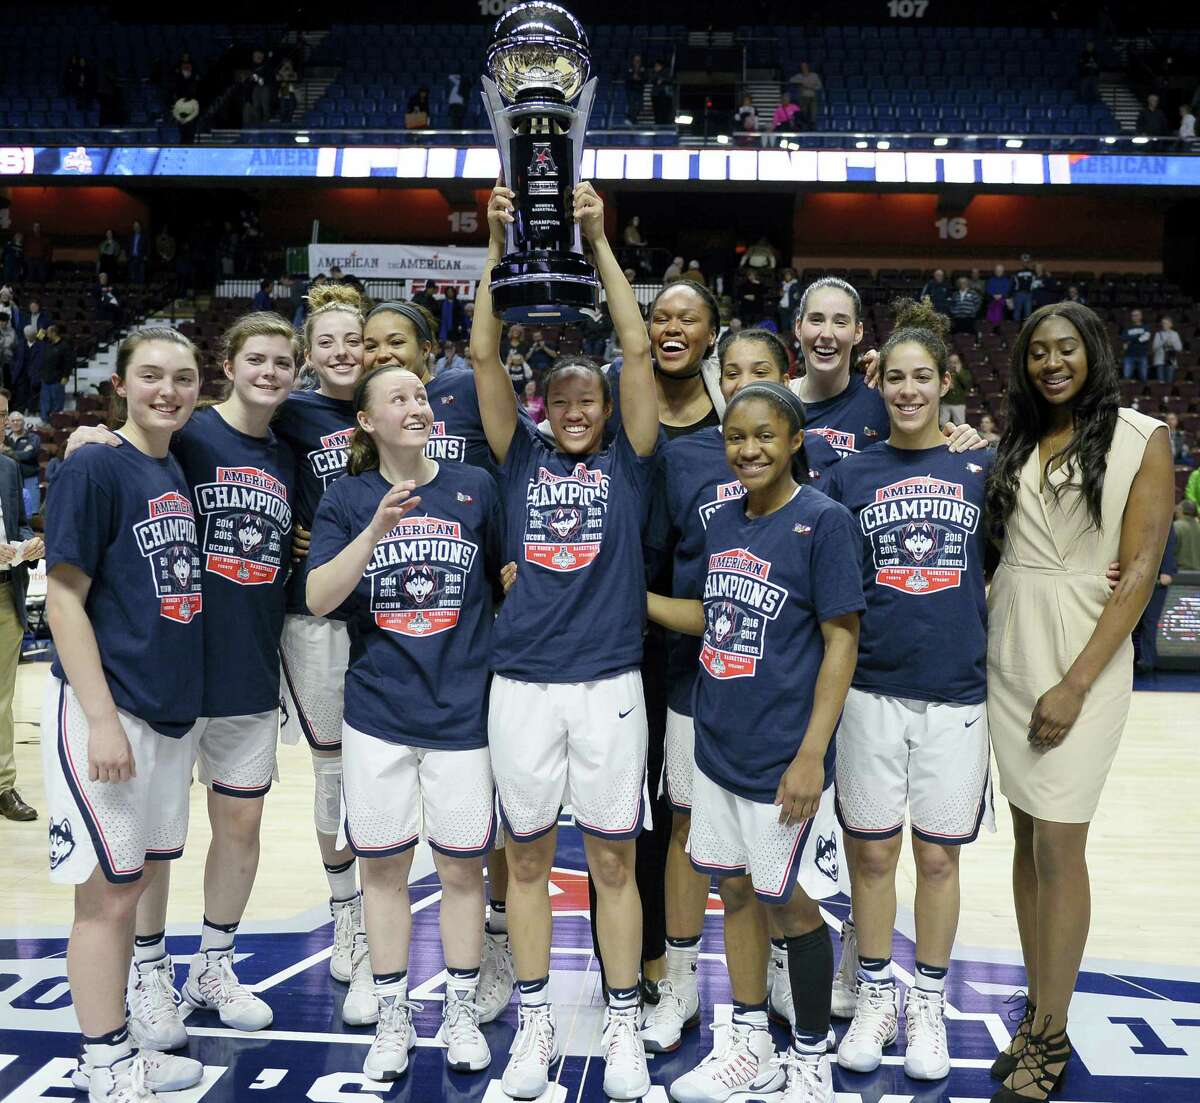 The UConn women’s basketball team pose with the American Athletic Conference championship trophy after defeating South Florida in the tournament final at the Mohegan Sun Arena Monday.